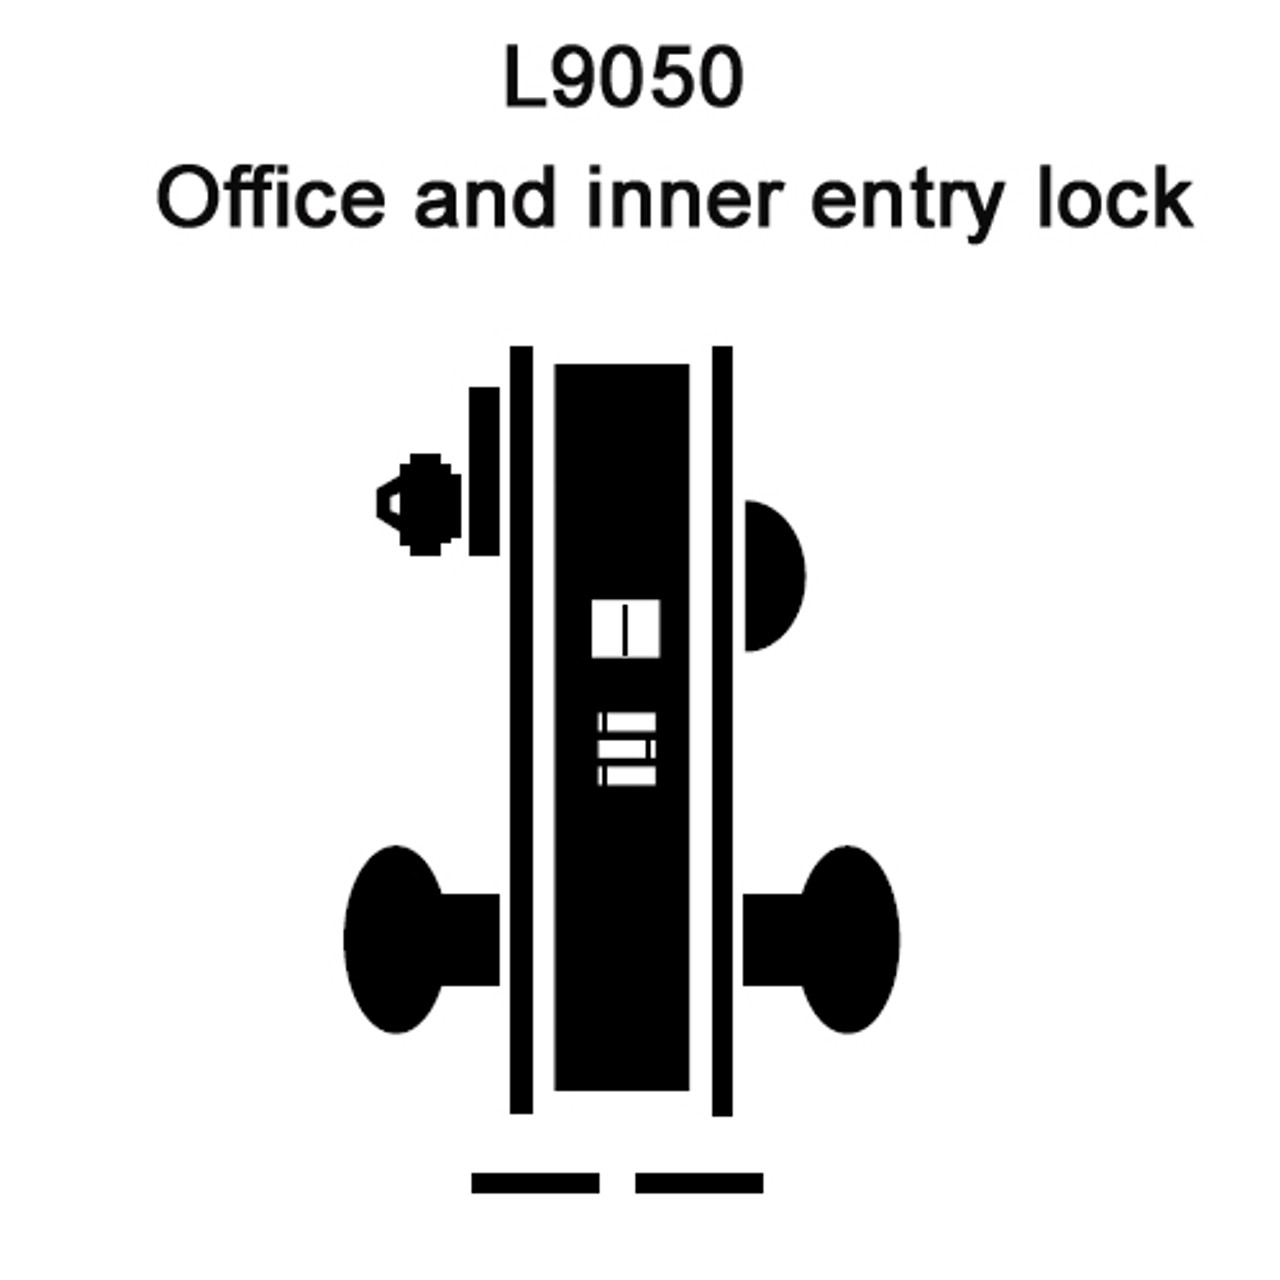 L9050P-06B-629 Schlage L Series Entrance Commercial Mortise Lock with 06 Cast Lever Design in Bright Stainless Steel